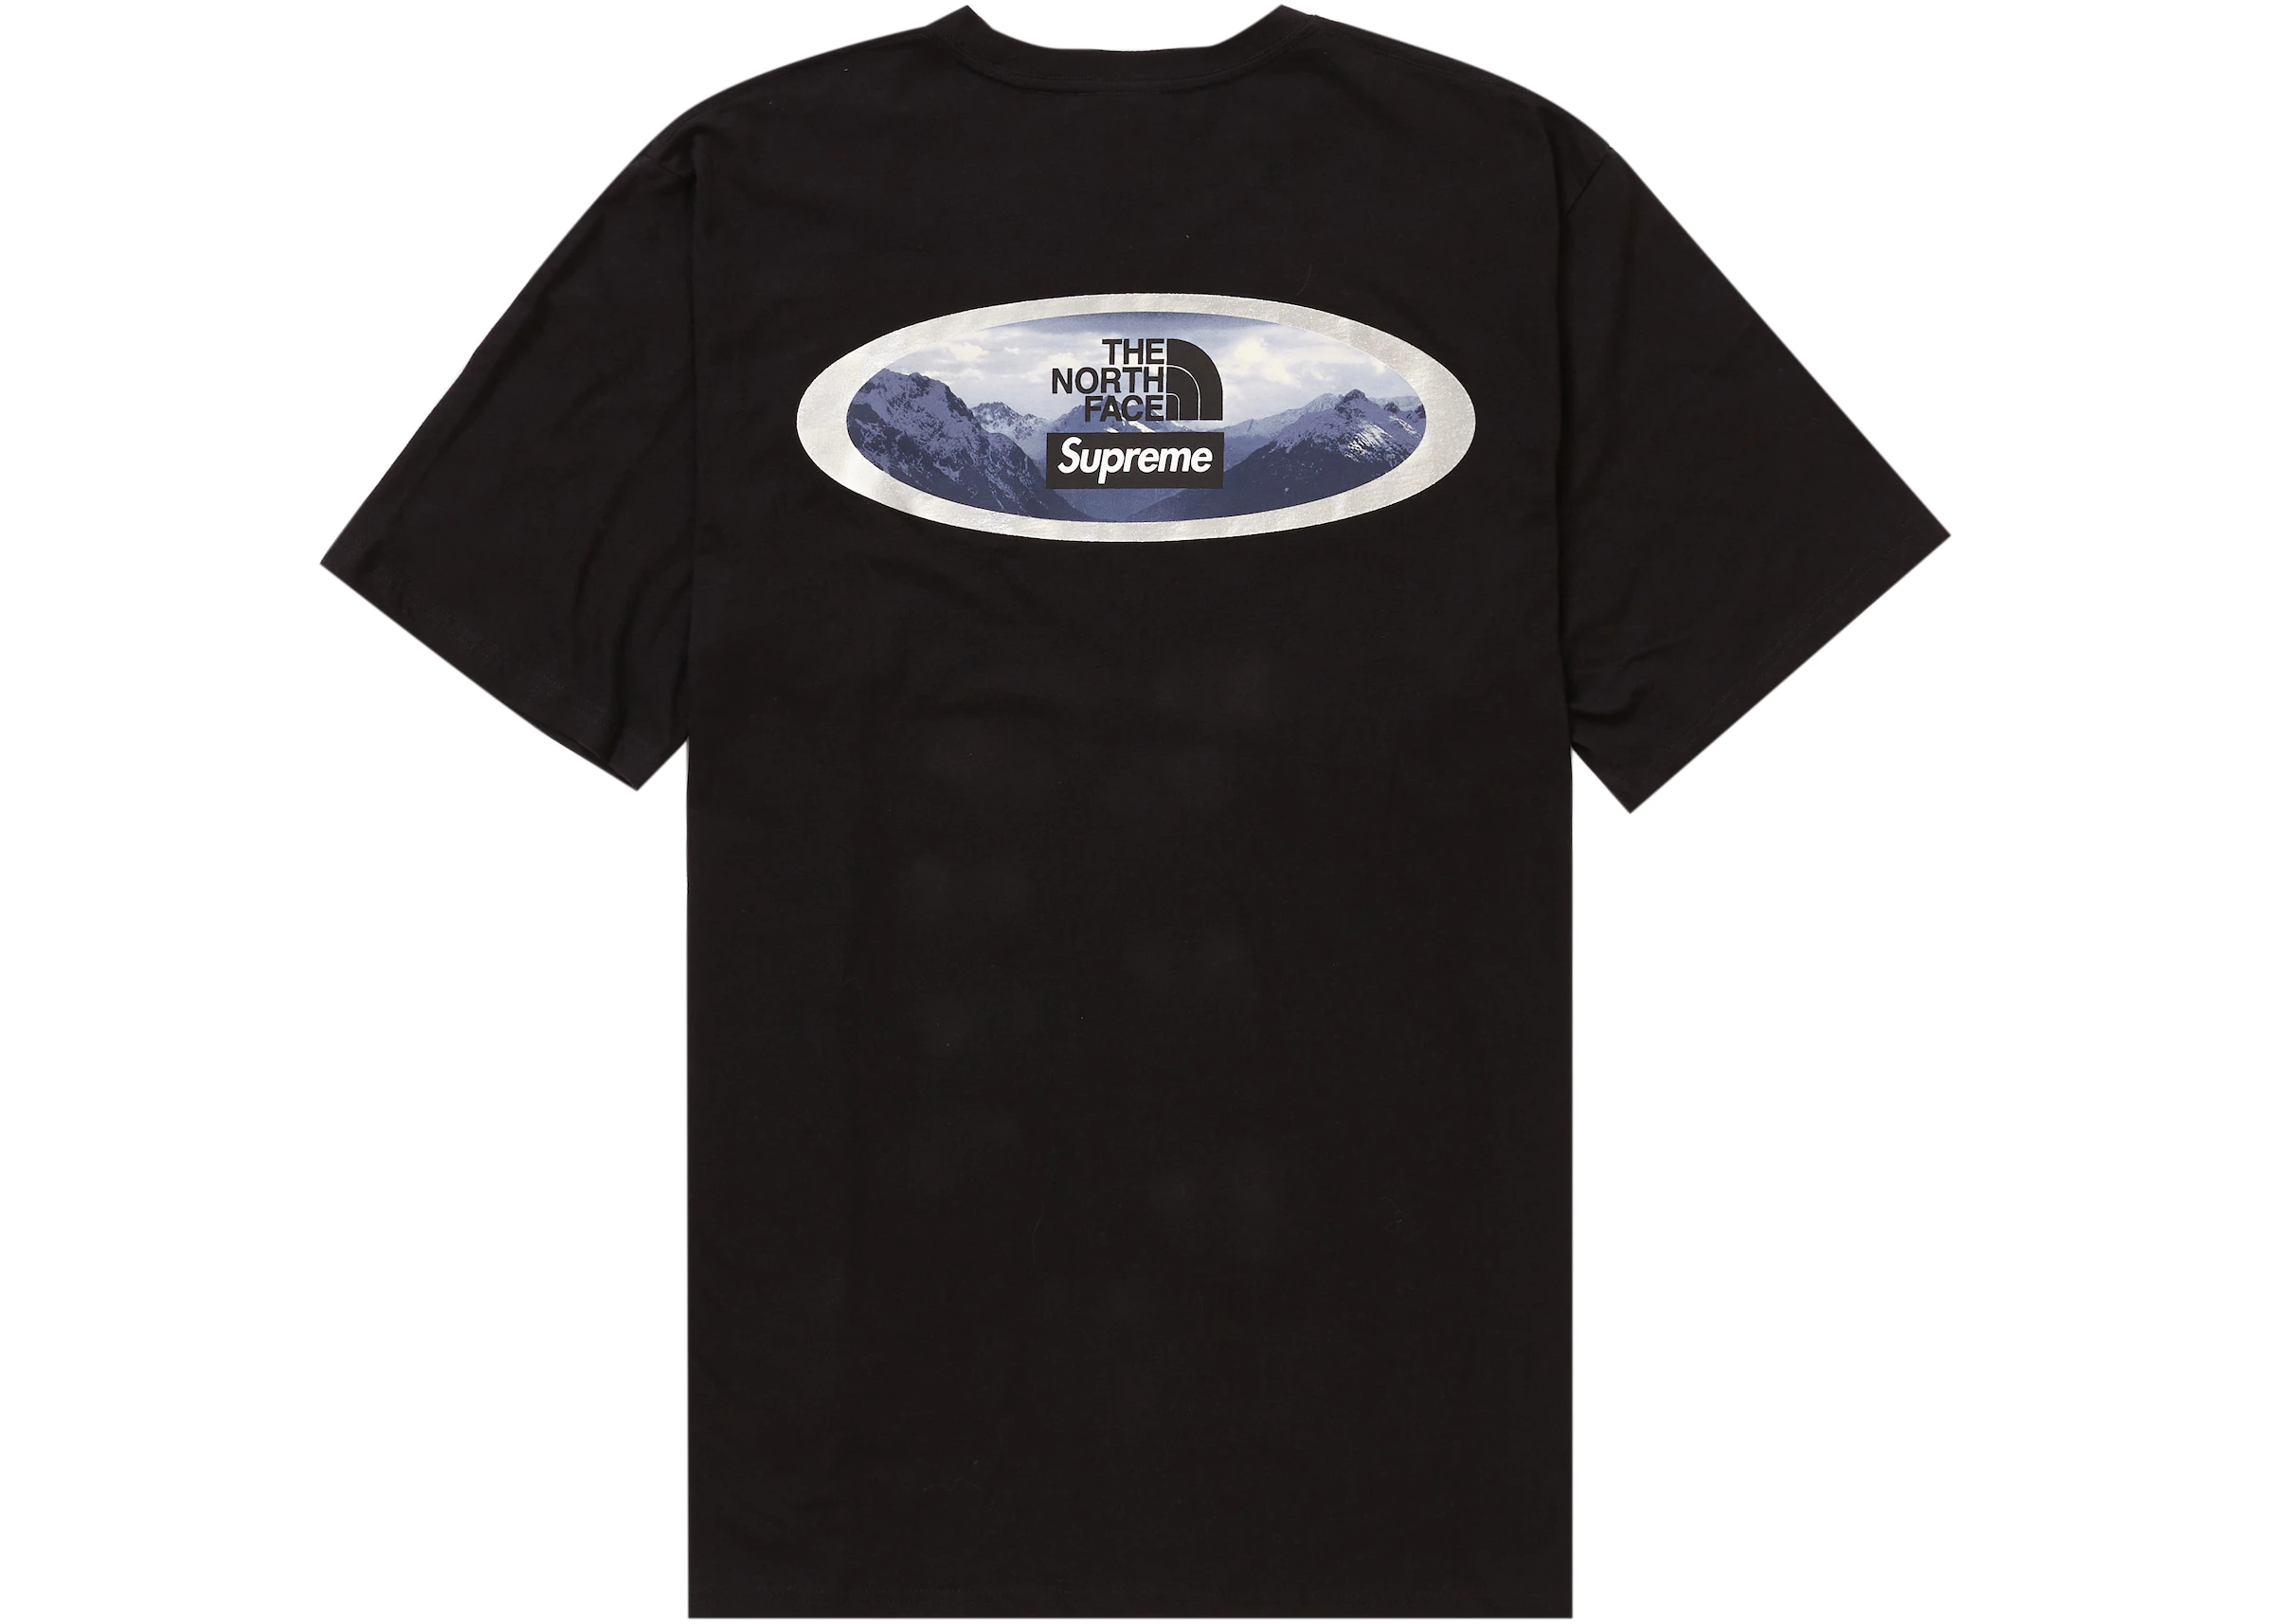 The North Face Mountains Tee - US